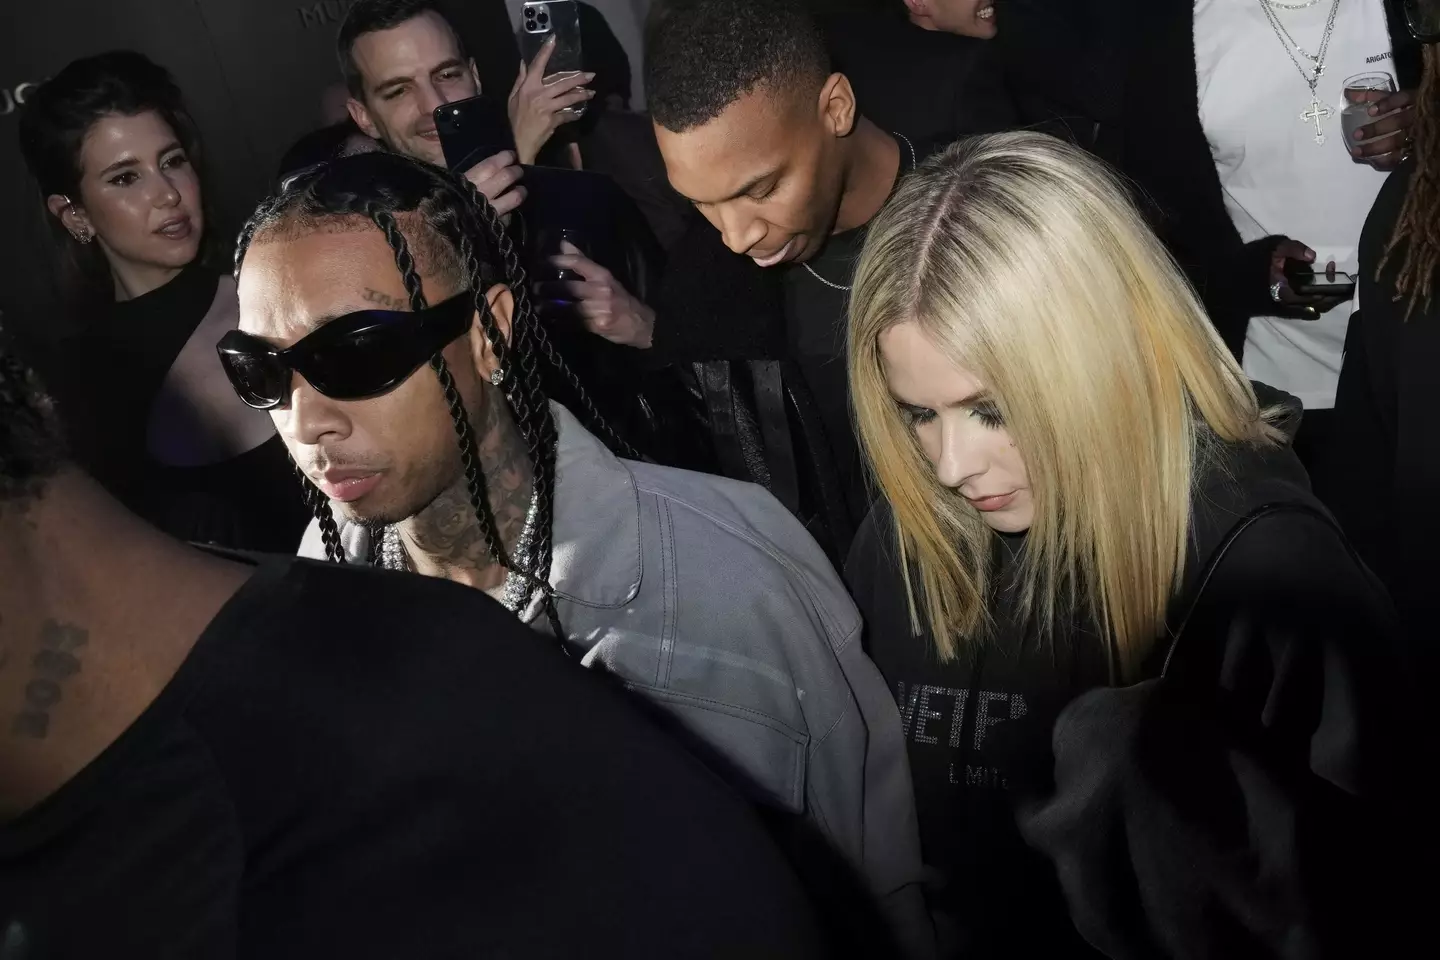 The rapper and the rockchick were seen in Paris together.